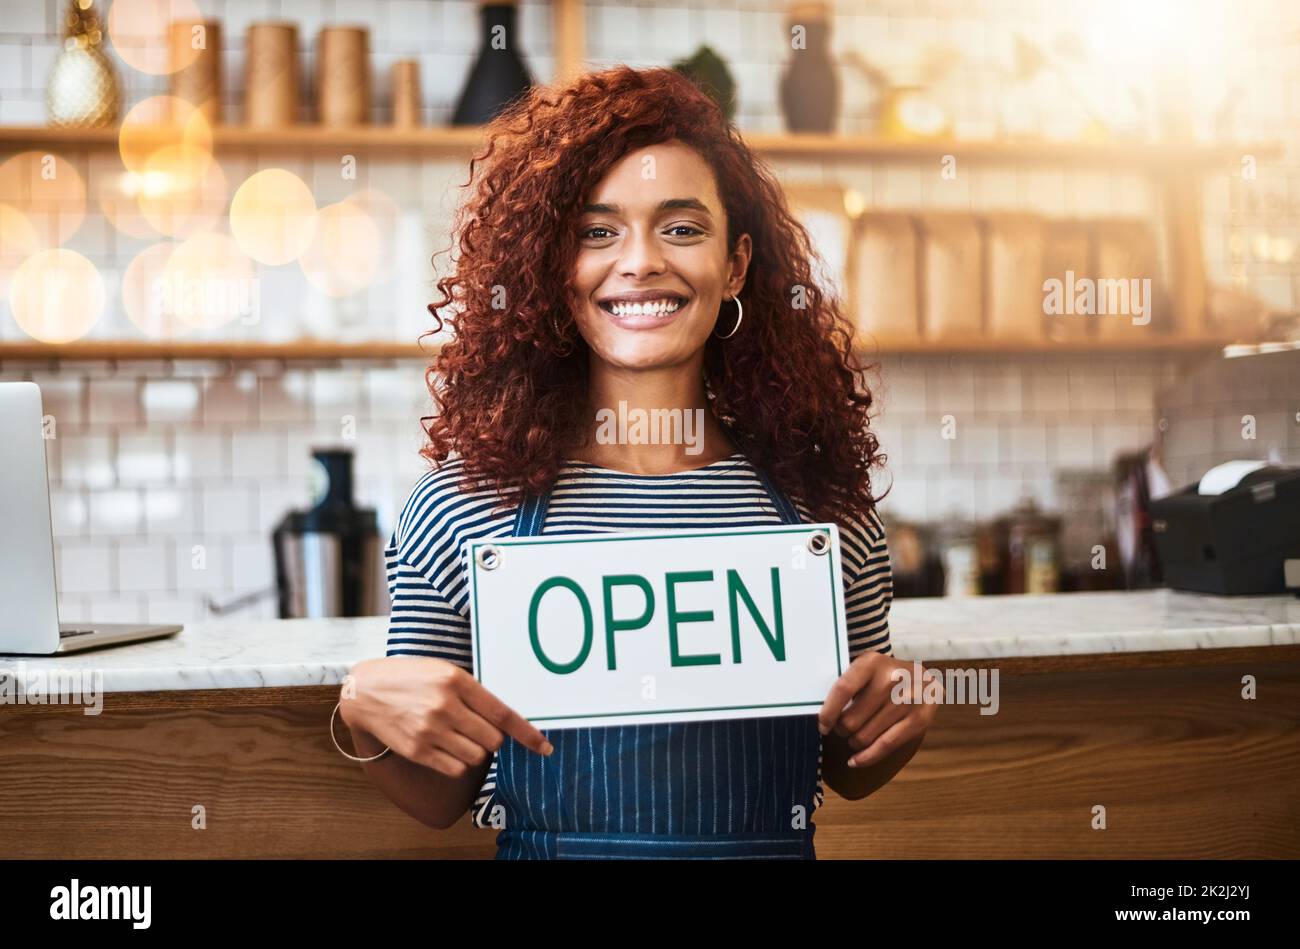 Service with a big smile. Portrait of a young woman holding up an open sign in her store. Stock Photo